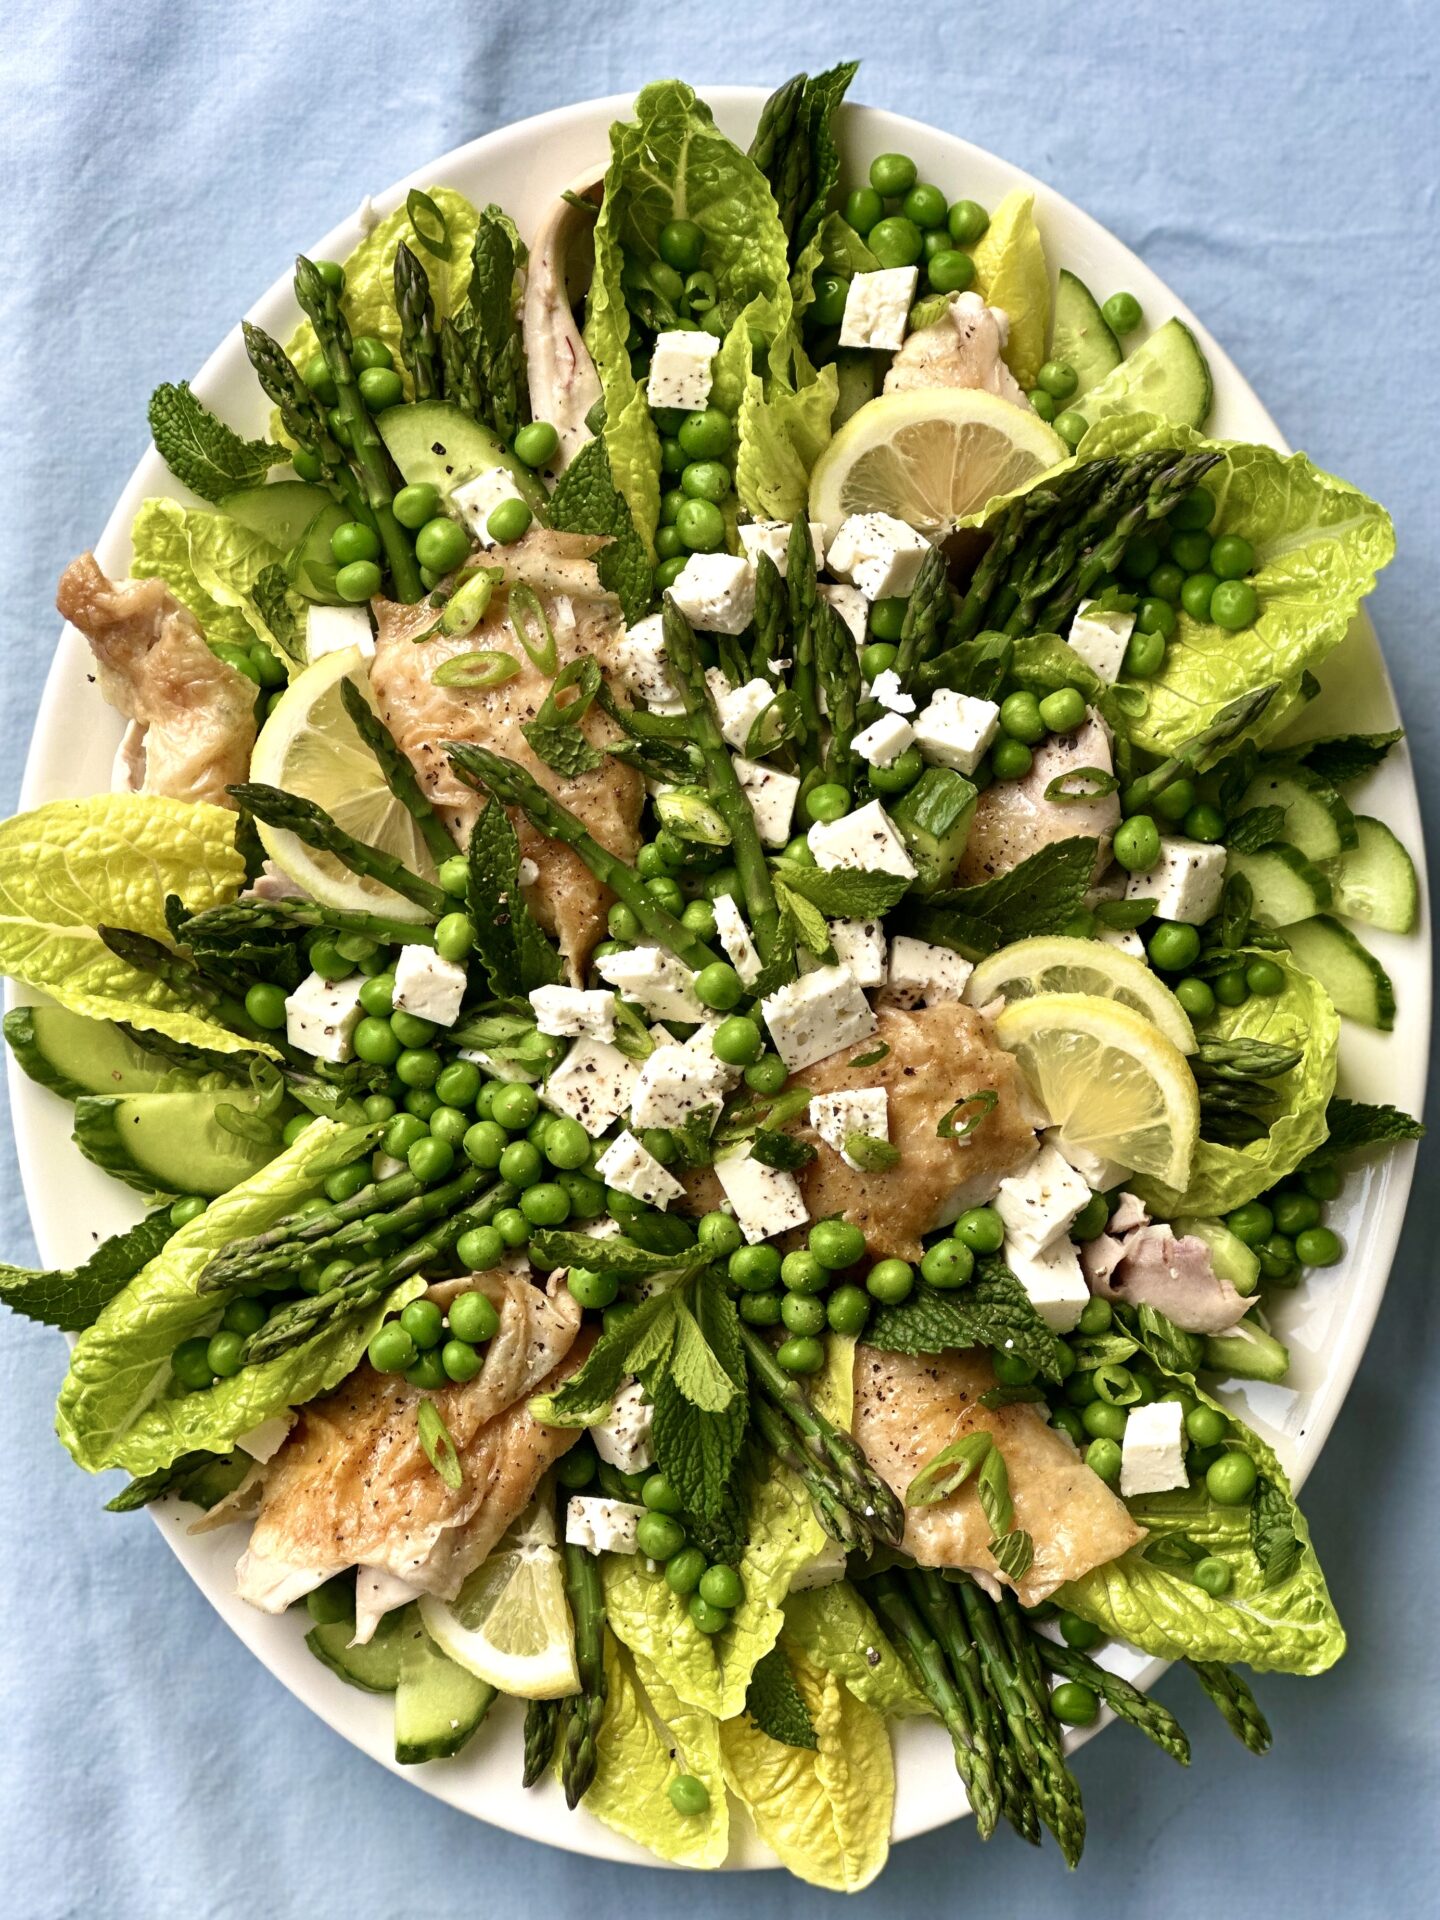 Platter of beautifully arranged salad greens with peas, asparagus, roast chicken and feta cheese